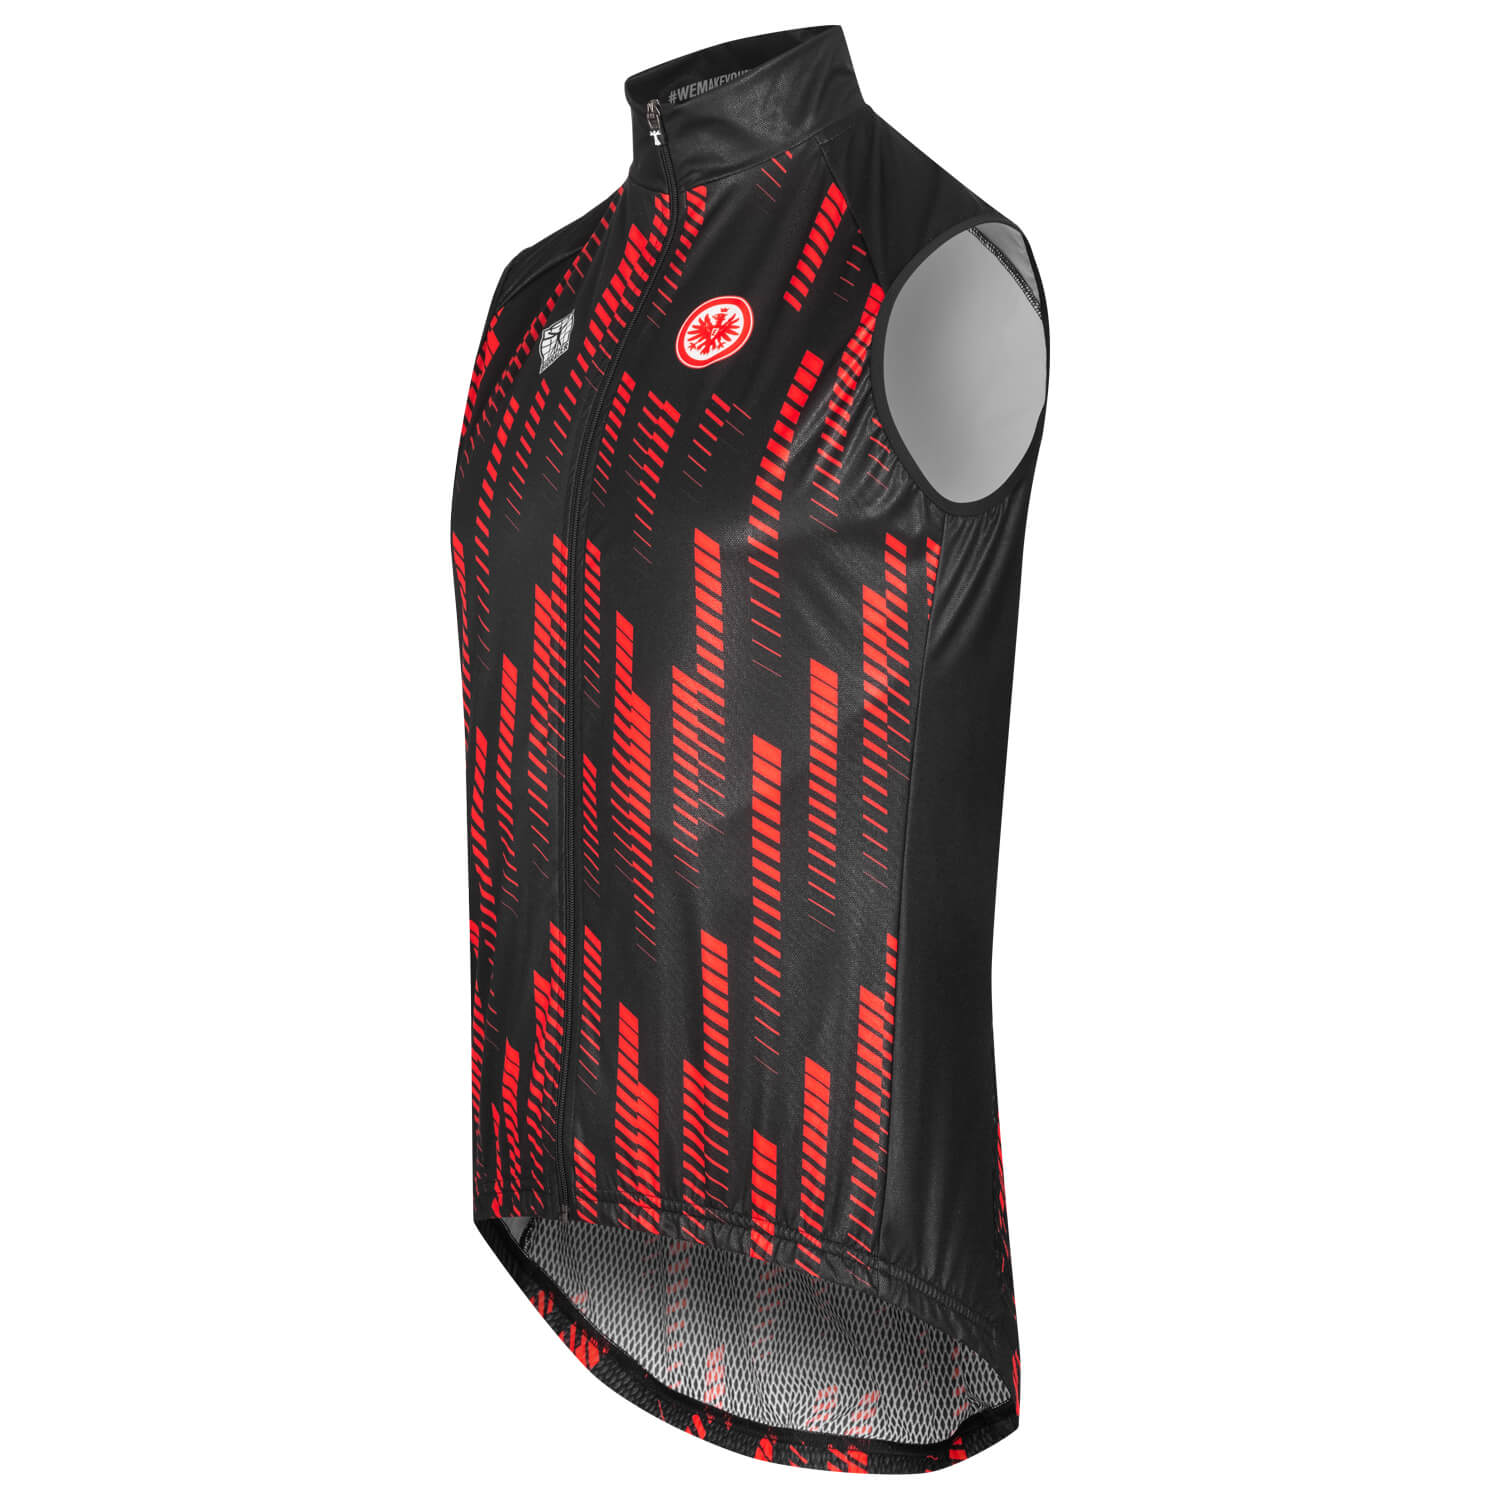 Bild 3: Cycling Vest Red Style 